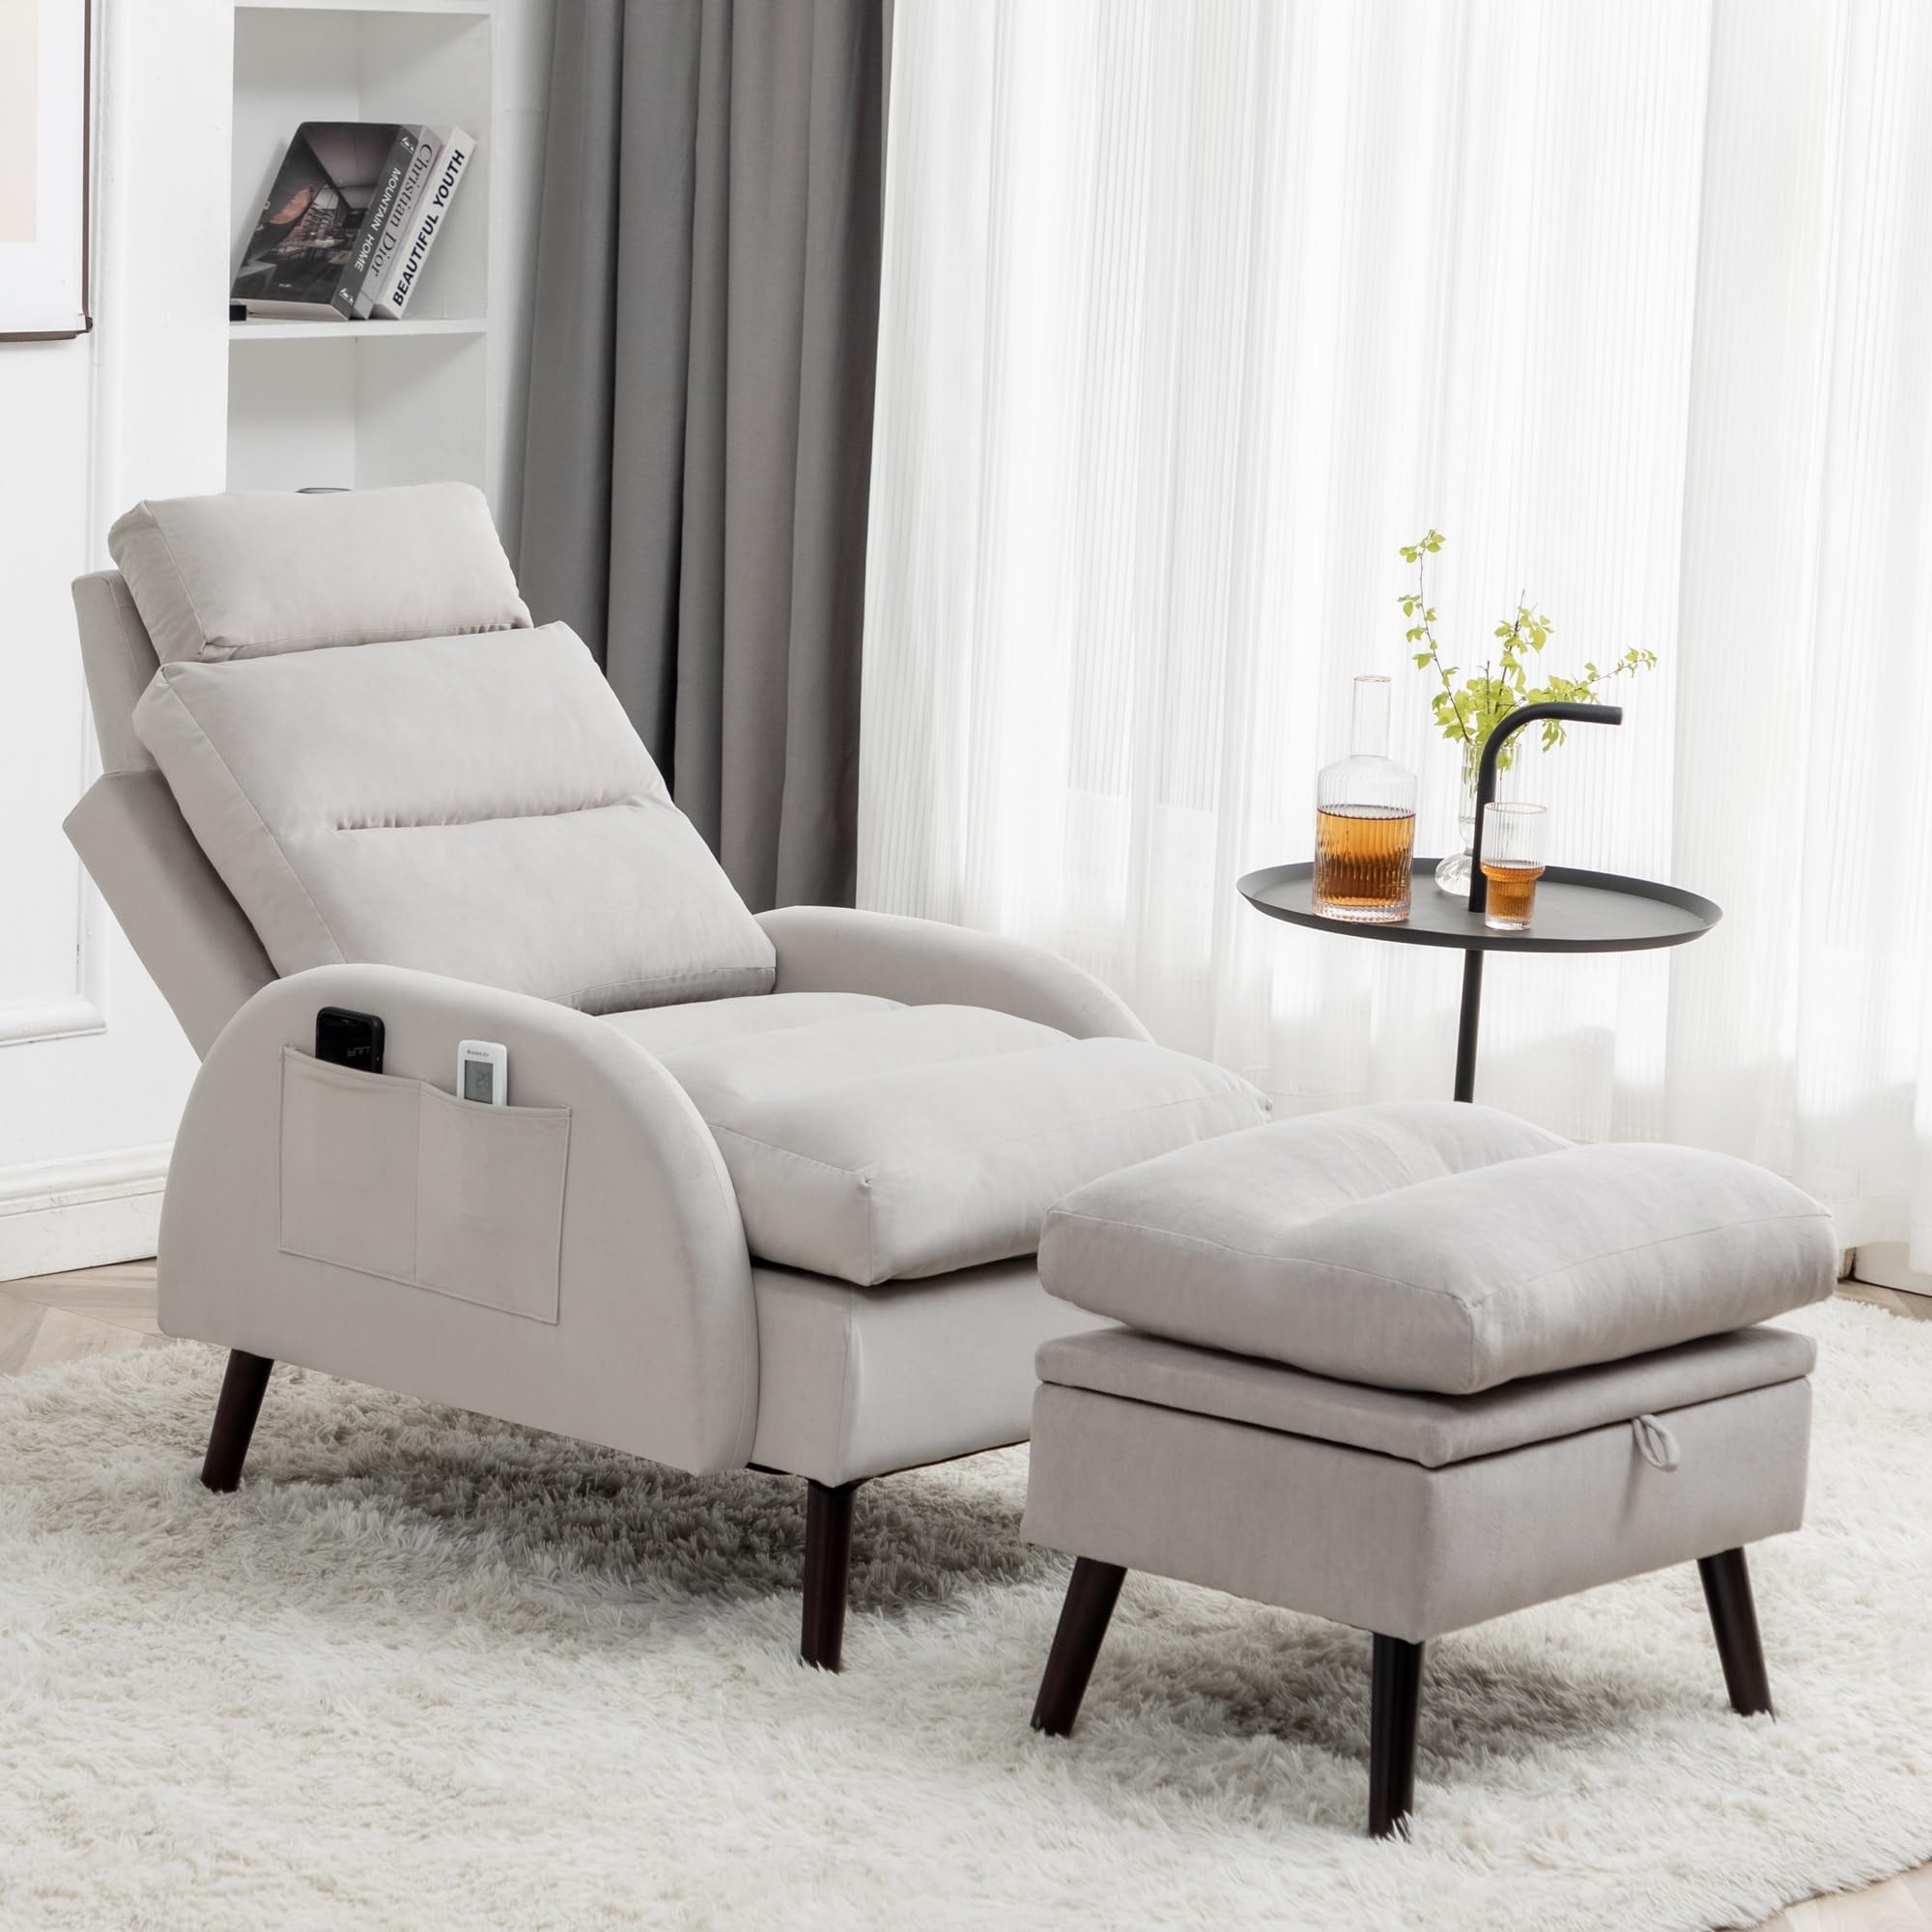 HOMYKA Accent Lounge Chair with Adjustable Backrest Storage Ottoman